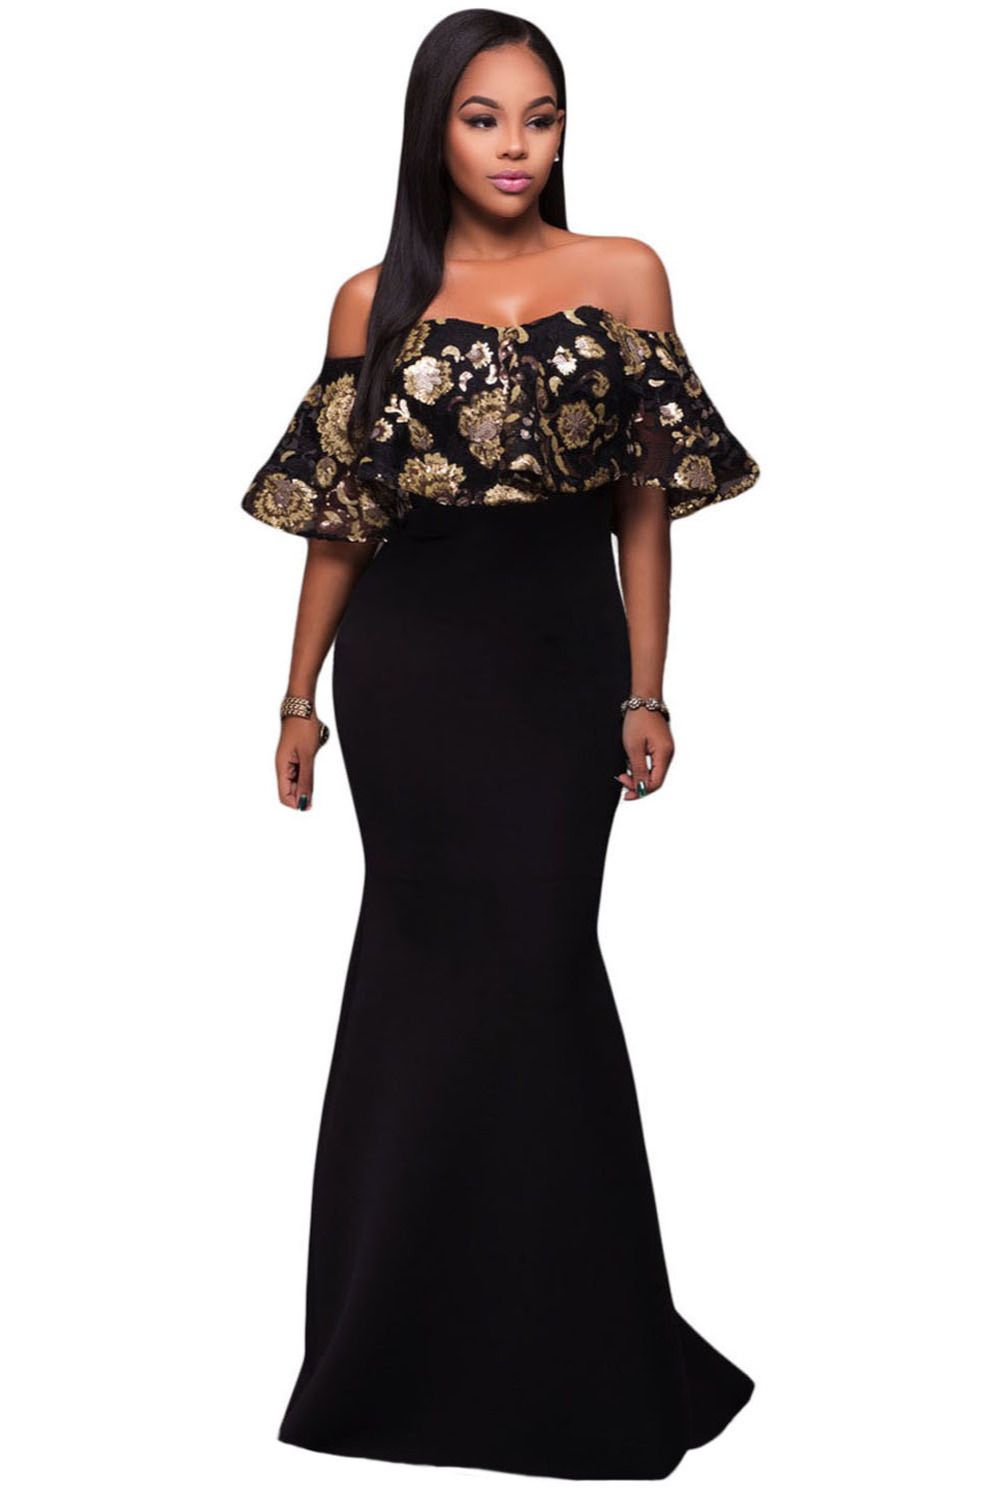 black and gold dresses for women